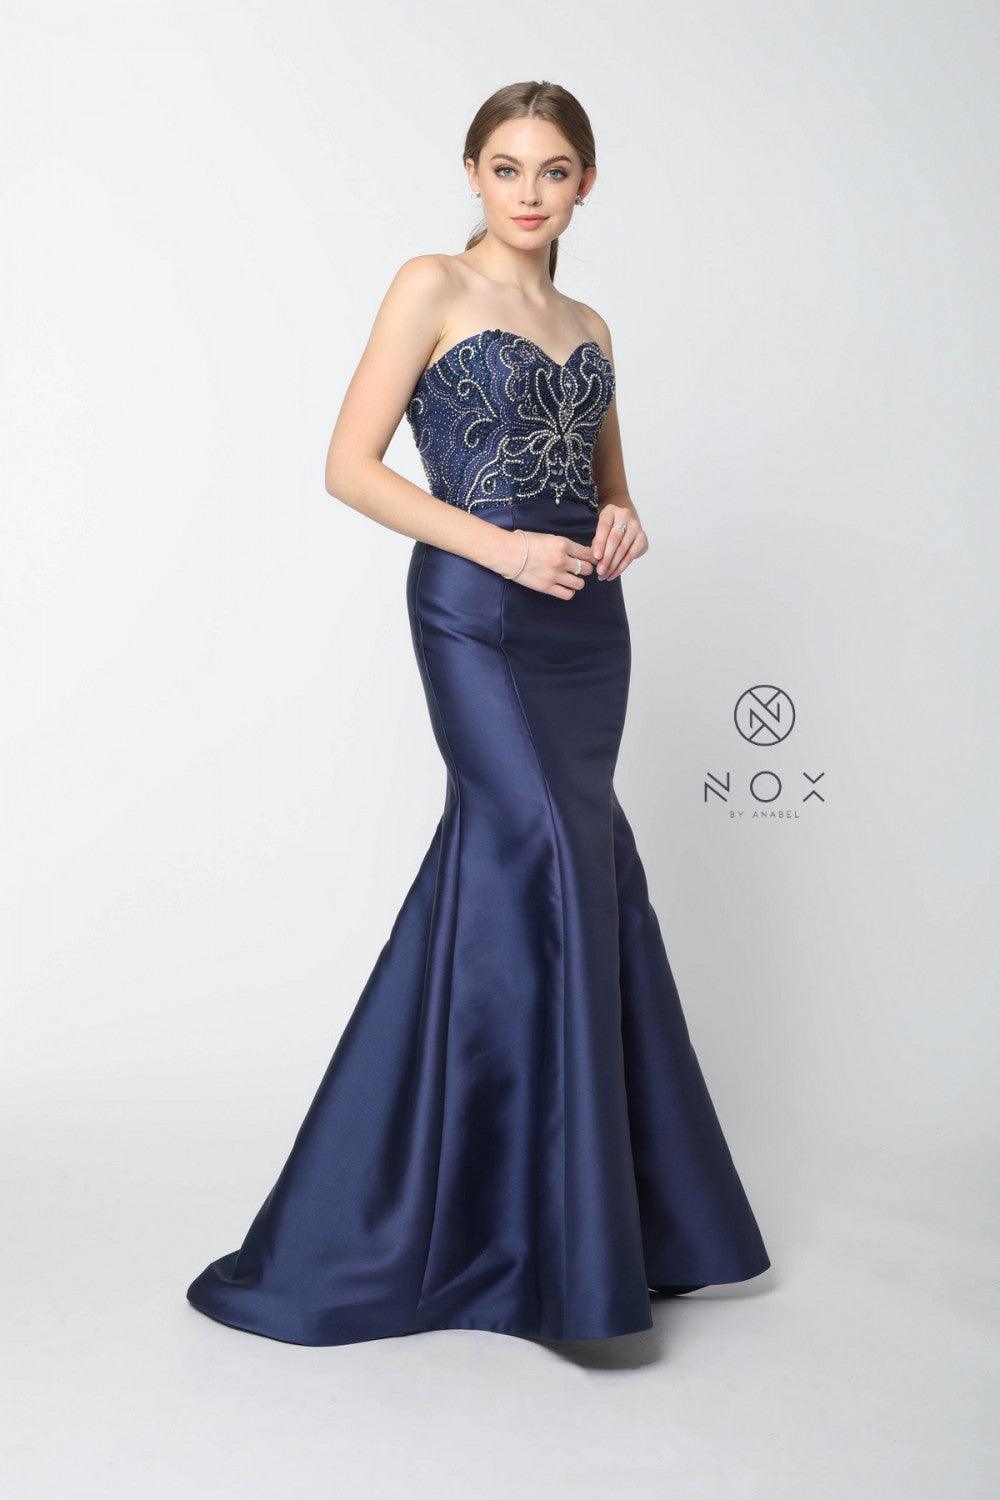 Sexy Fitted Long Prom Gown Evening Dress - The Dress Outlet Nox Anabel